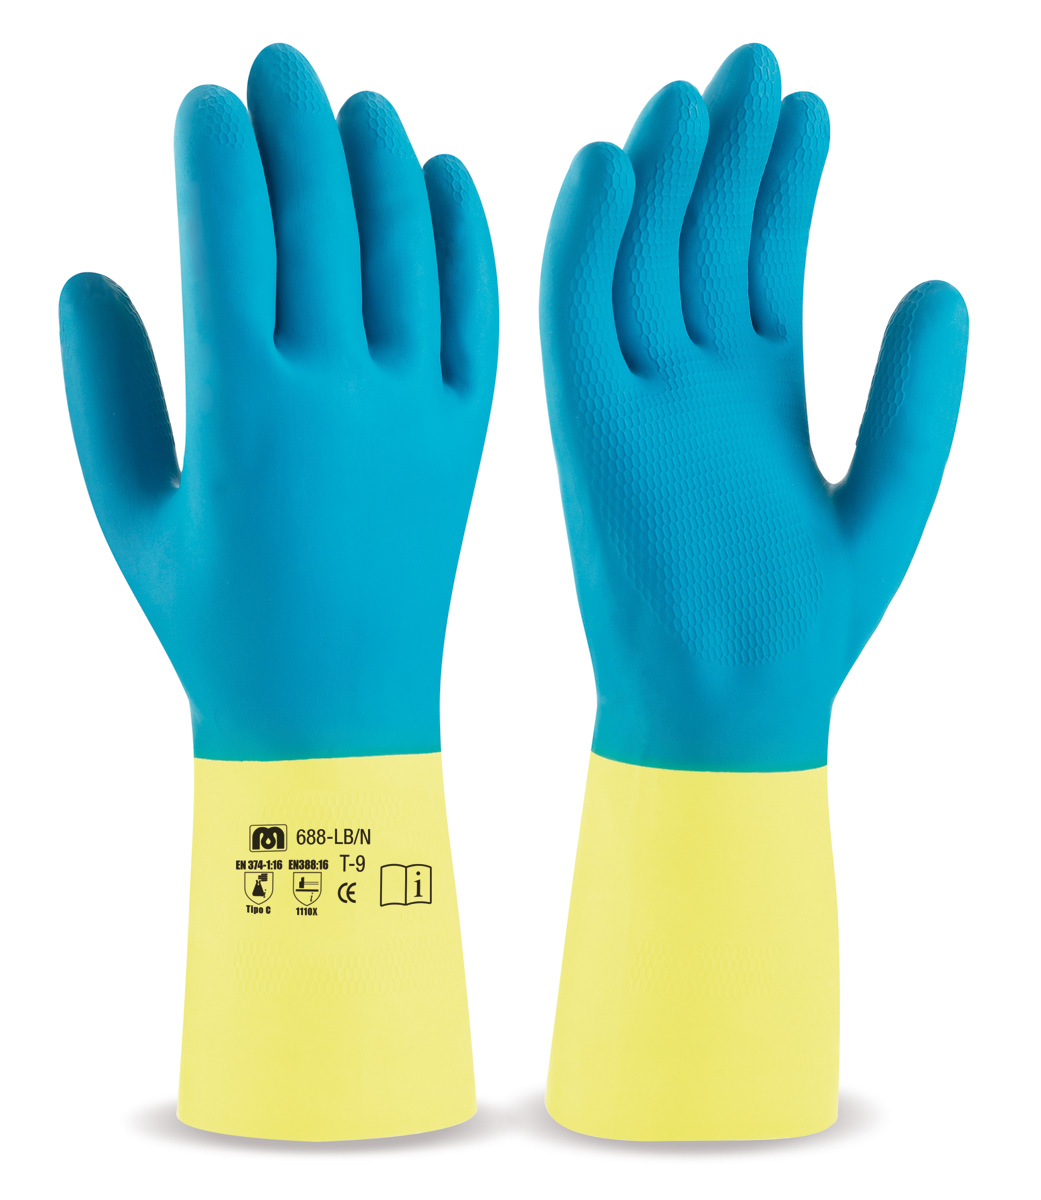 688-LB/N Work Gloves Neoprene Two-tone latex glove with neoprene reinforcement for chemical and mechanical hazards.